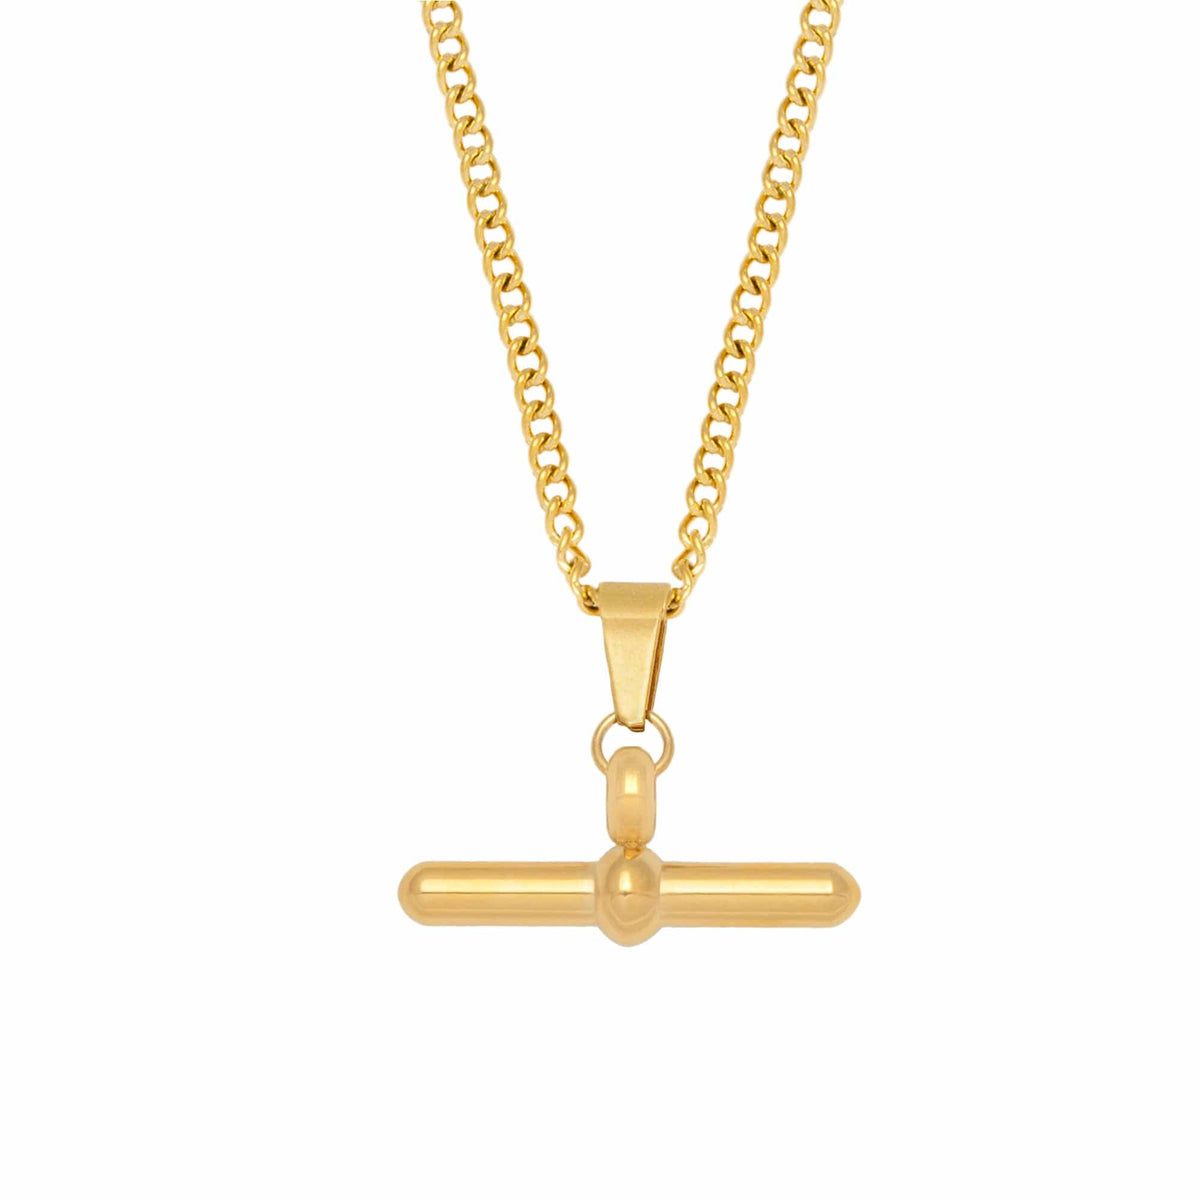 BohoMoon Stainless Steel Set Sail Tbar Necklace Gold